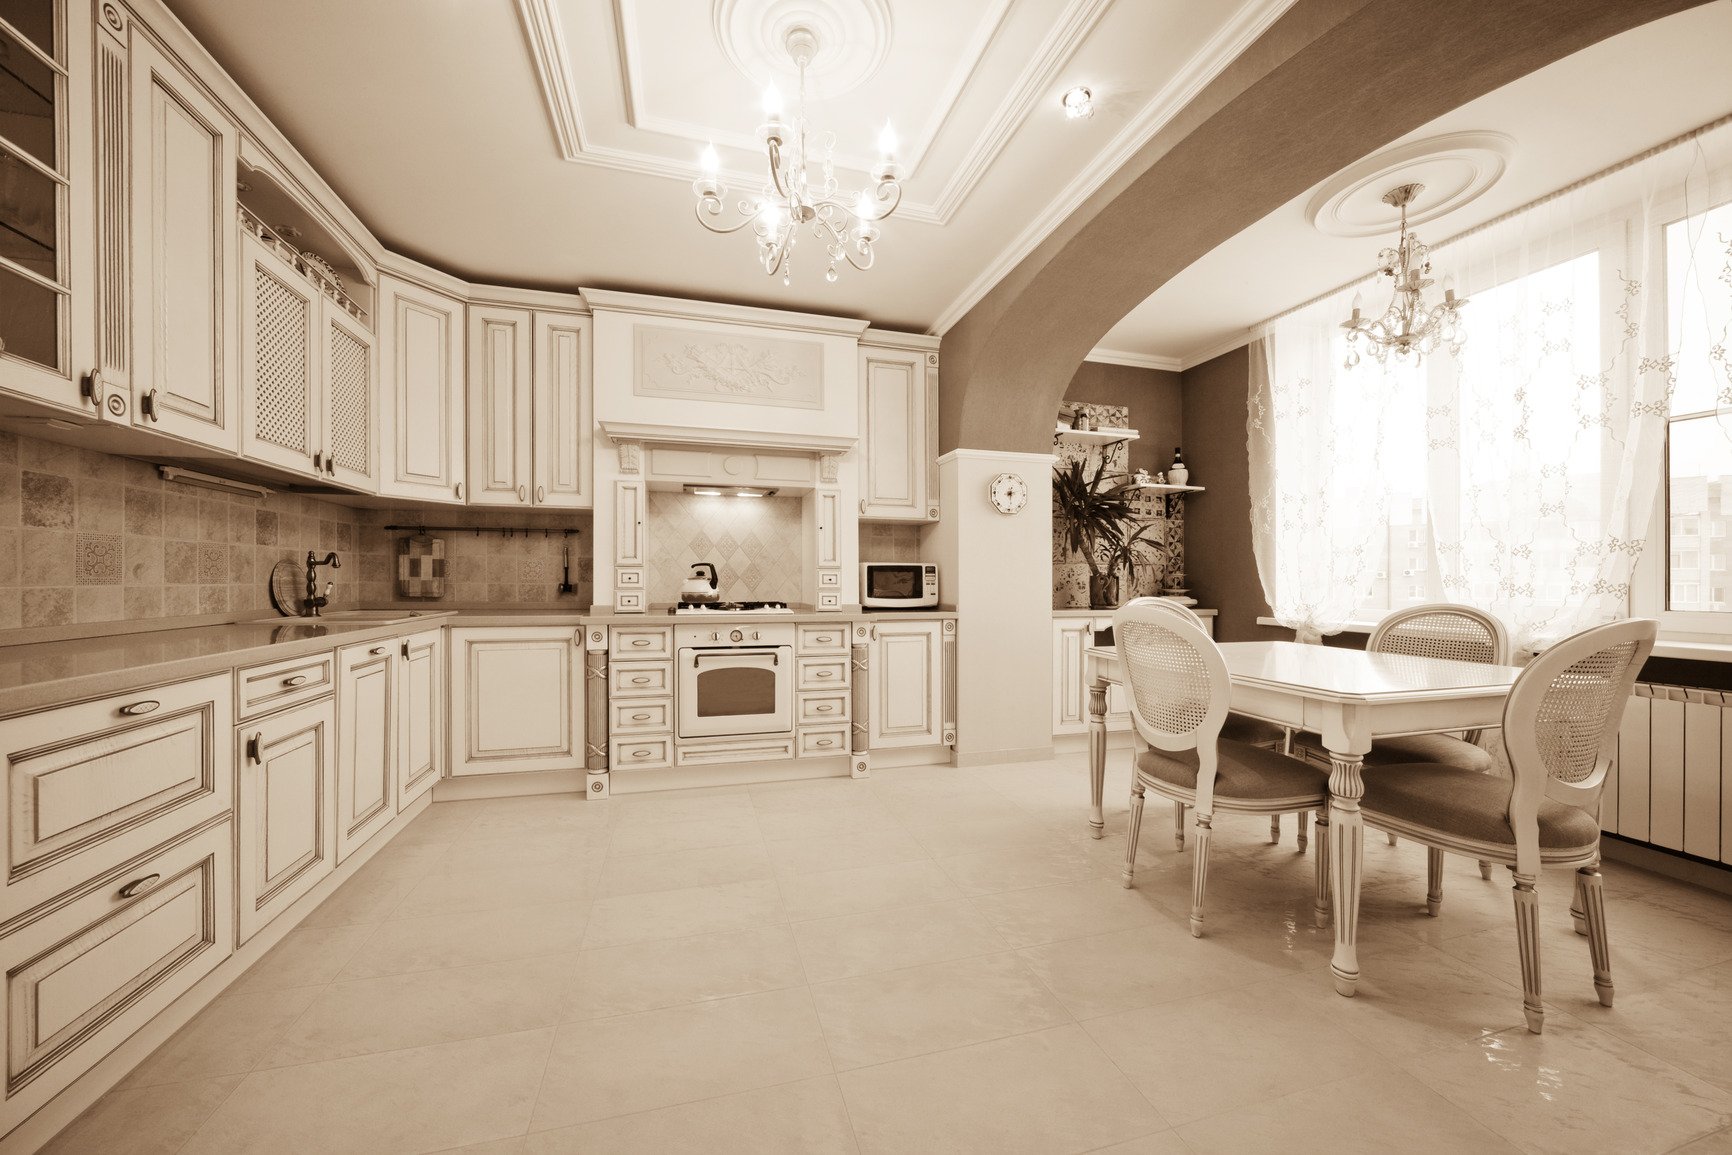 Kitchen Cabinets Surrey BC - Custom Kitchen Cabinets Vancouver North, Burnaby, Lower ...1732 x 1155